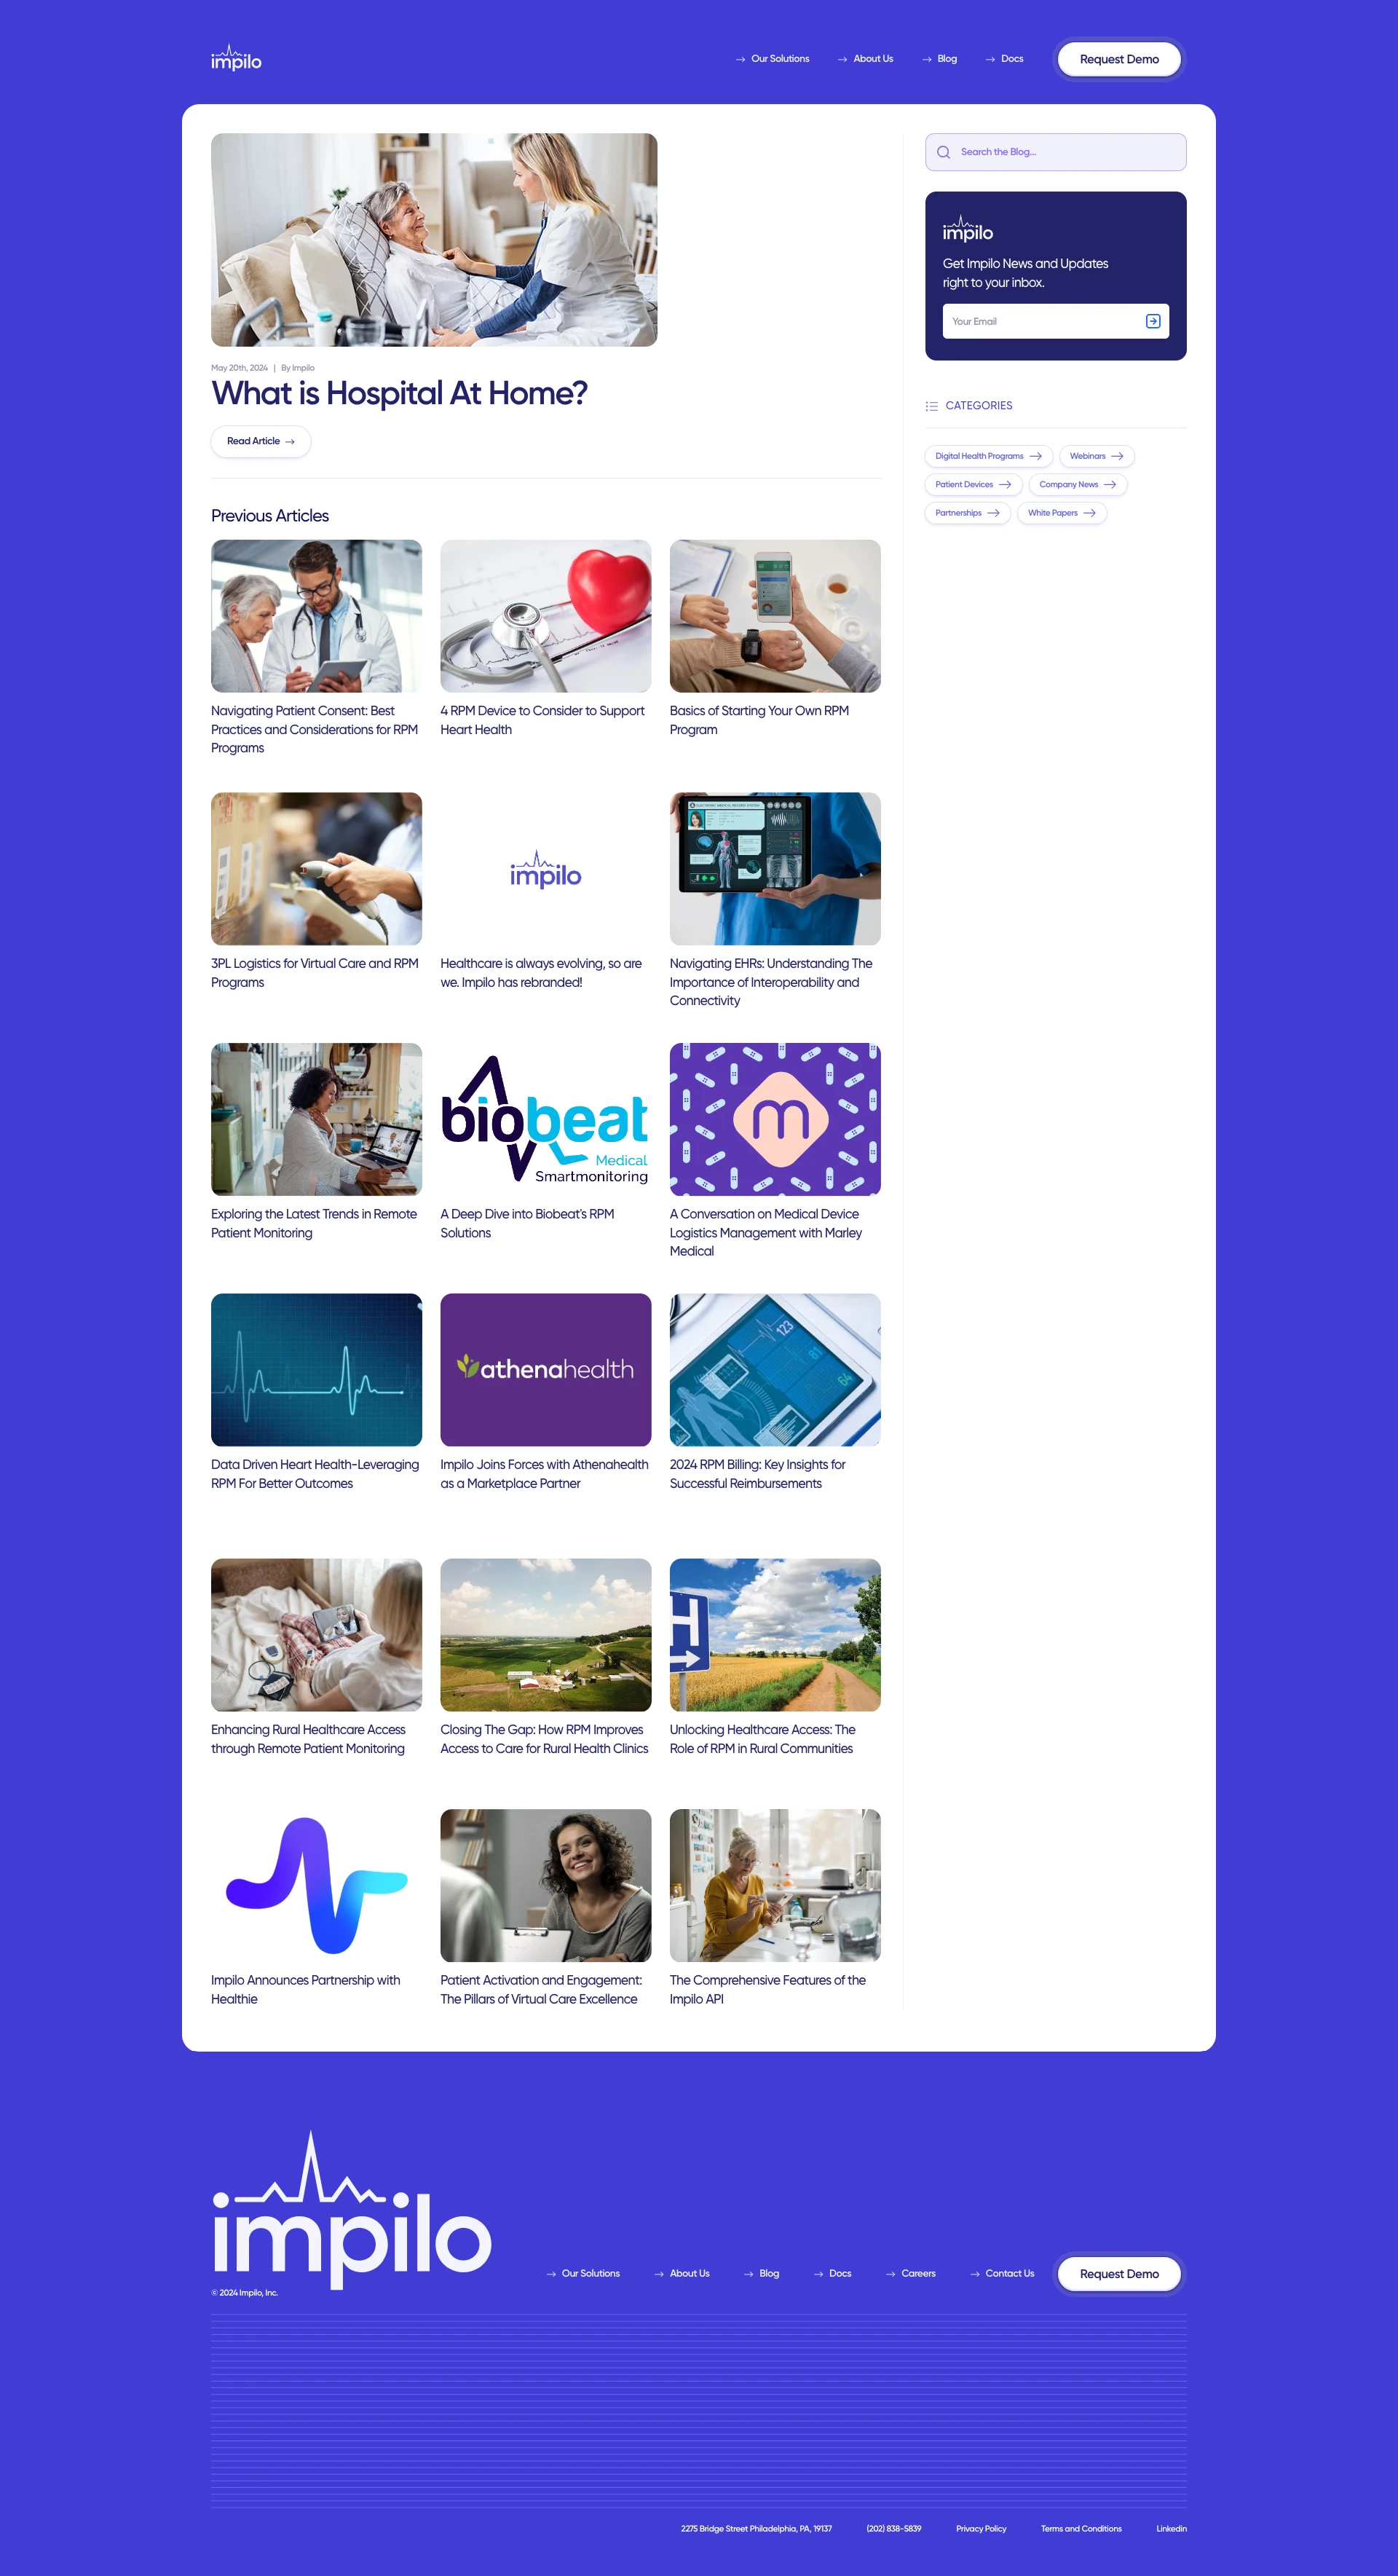 Impilo Landing Page Example: Impilo provides API infrastructure for patient monitoring and connected supplies. Our platform enables the ability to buy, distribute, support, and integrate digital health devices/supplies. Impilo handles patient monitoring operations, while you handle the clinical.